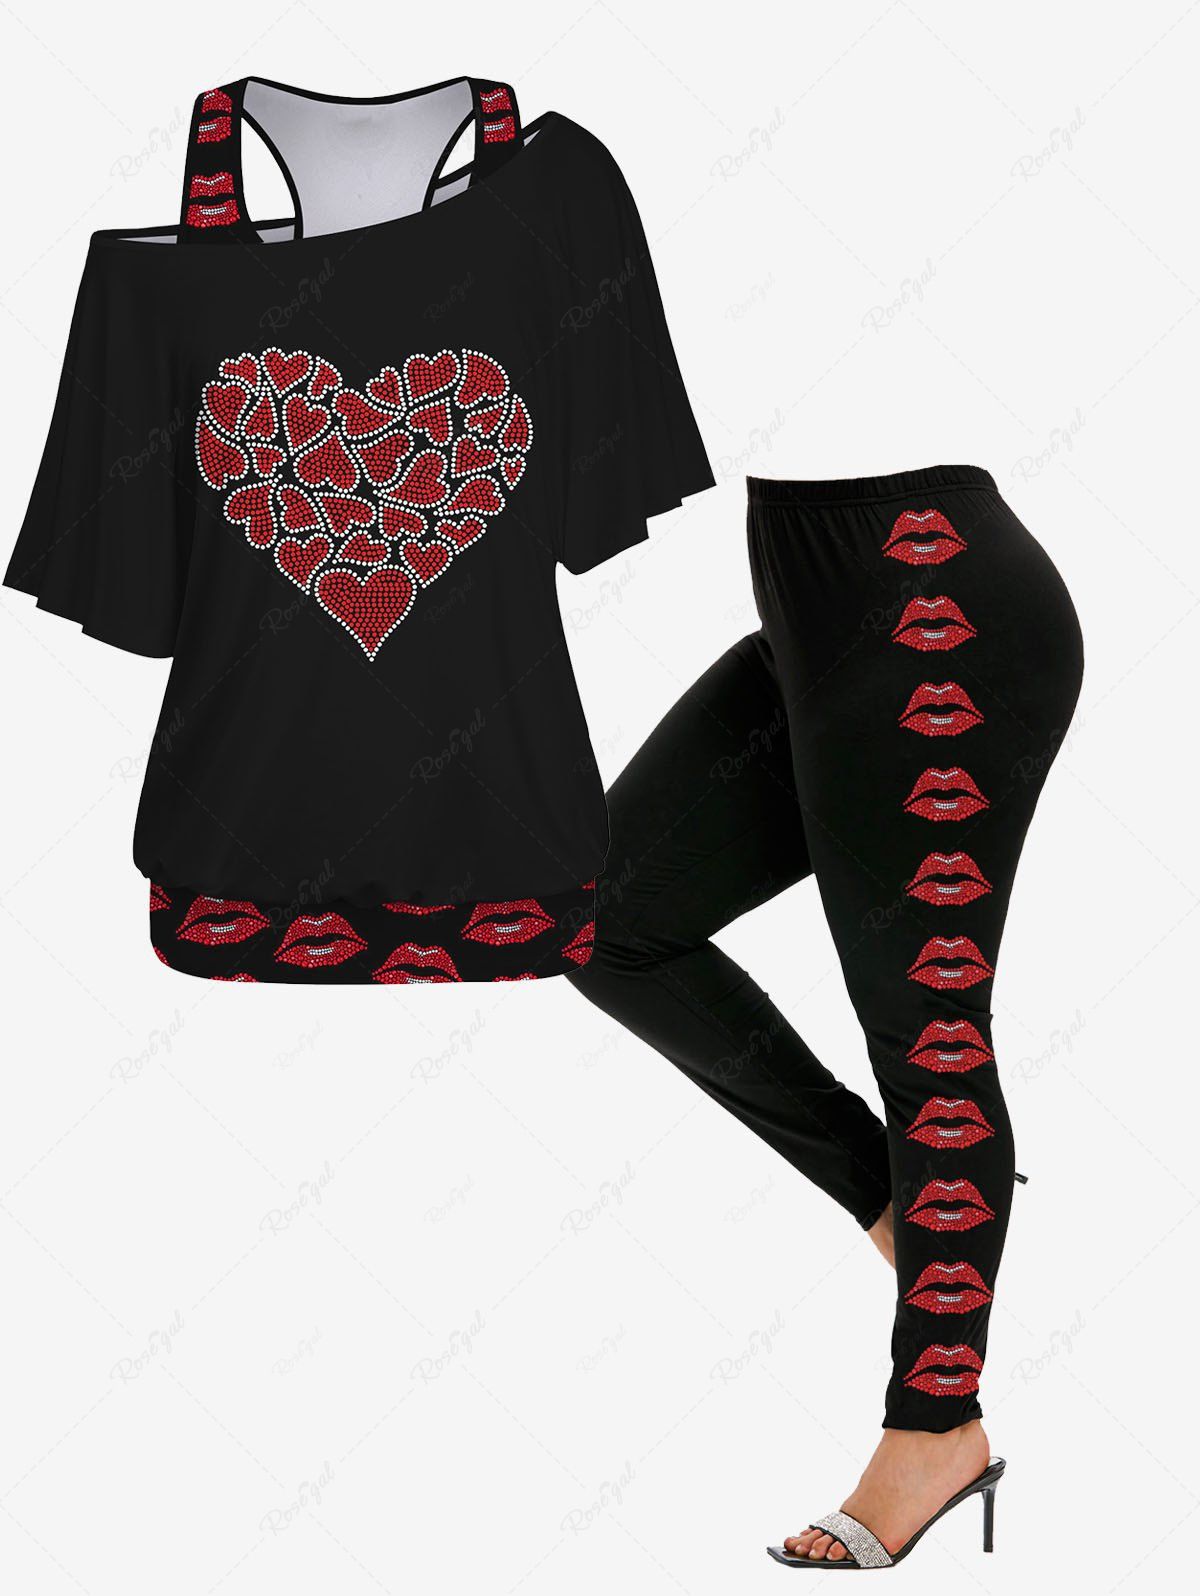 Affordable Lip Printed Racerback Tank Top and Skew Neck Batwing Sleeves Heart Graphic T-shirt Valentines Set and Leggings Plus Size Outfit  